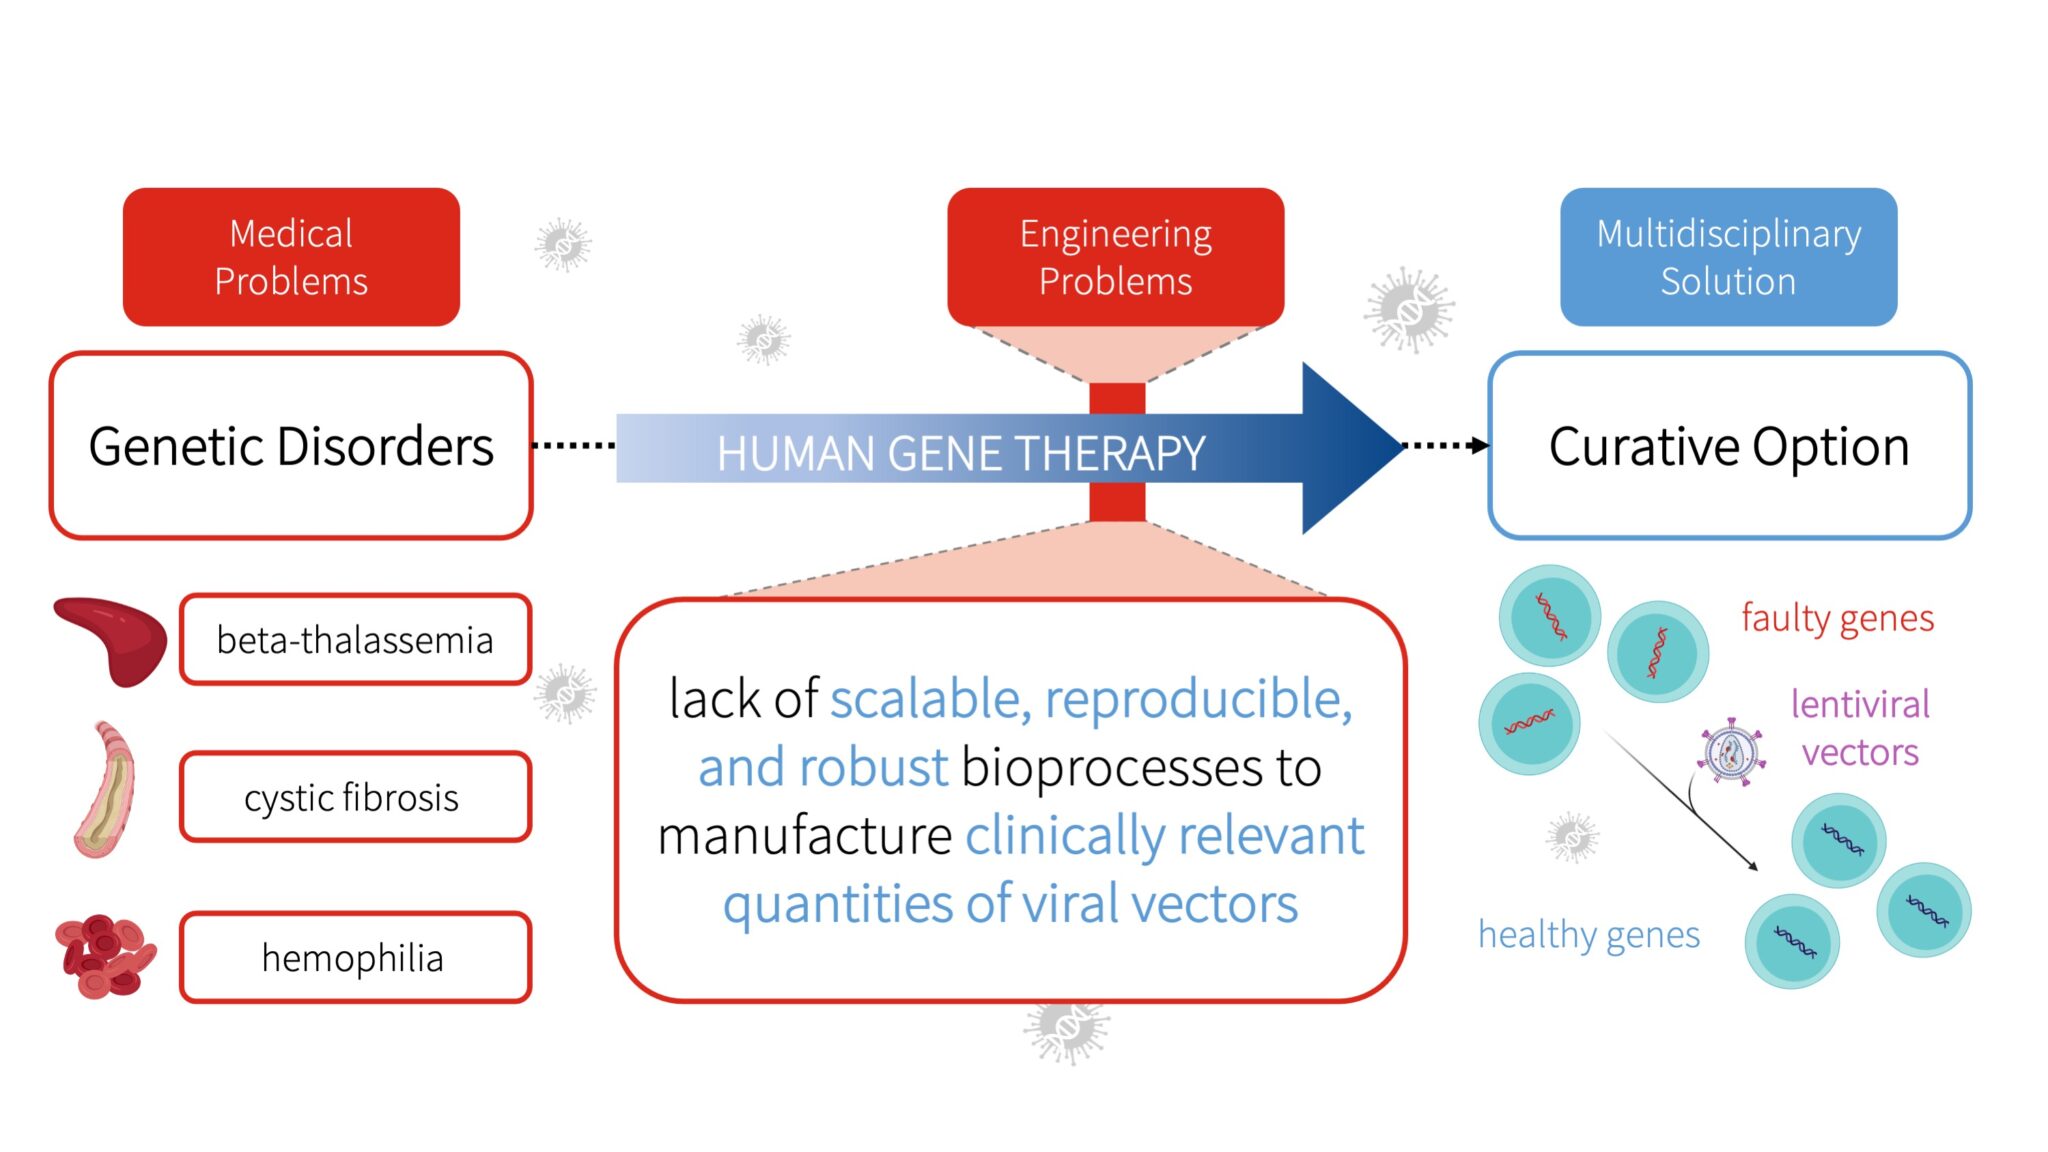 Large-scale Production of Viral Vectors for Human Gene Therapy